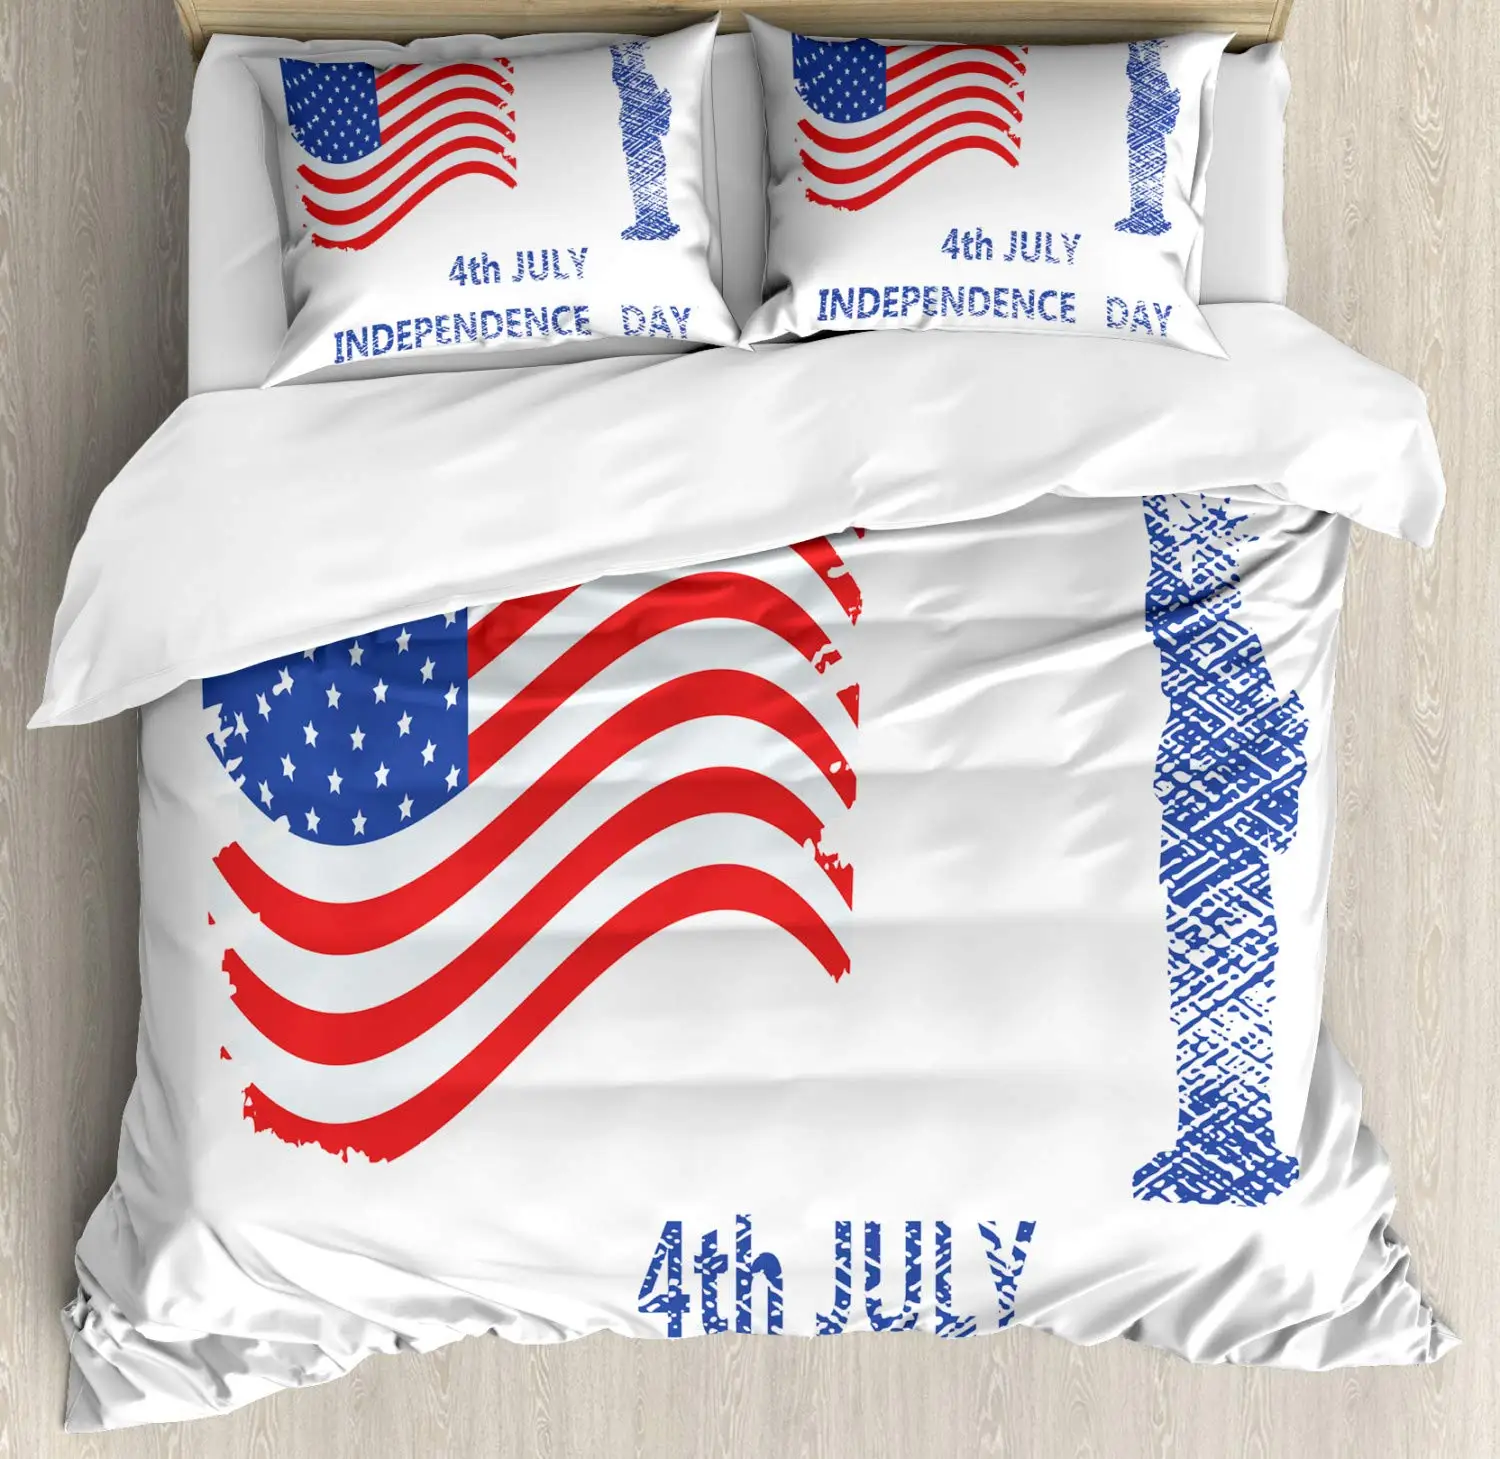 

Fourth of July Duvet Cover Set Calligraphic Independence Day and The of Liberty 3 Piece Bedding Set Dark Coral Dark Violet